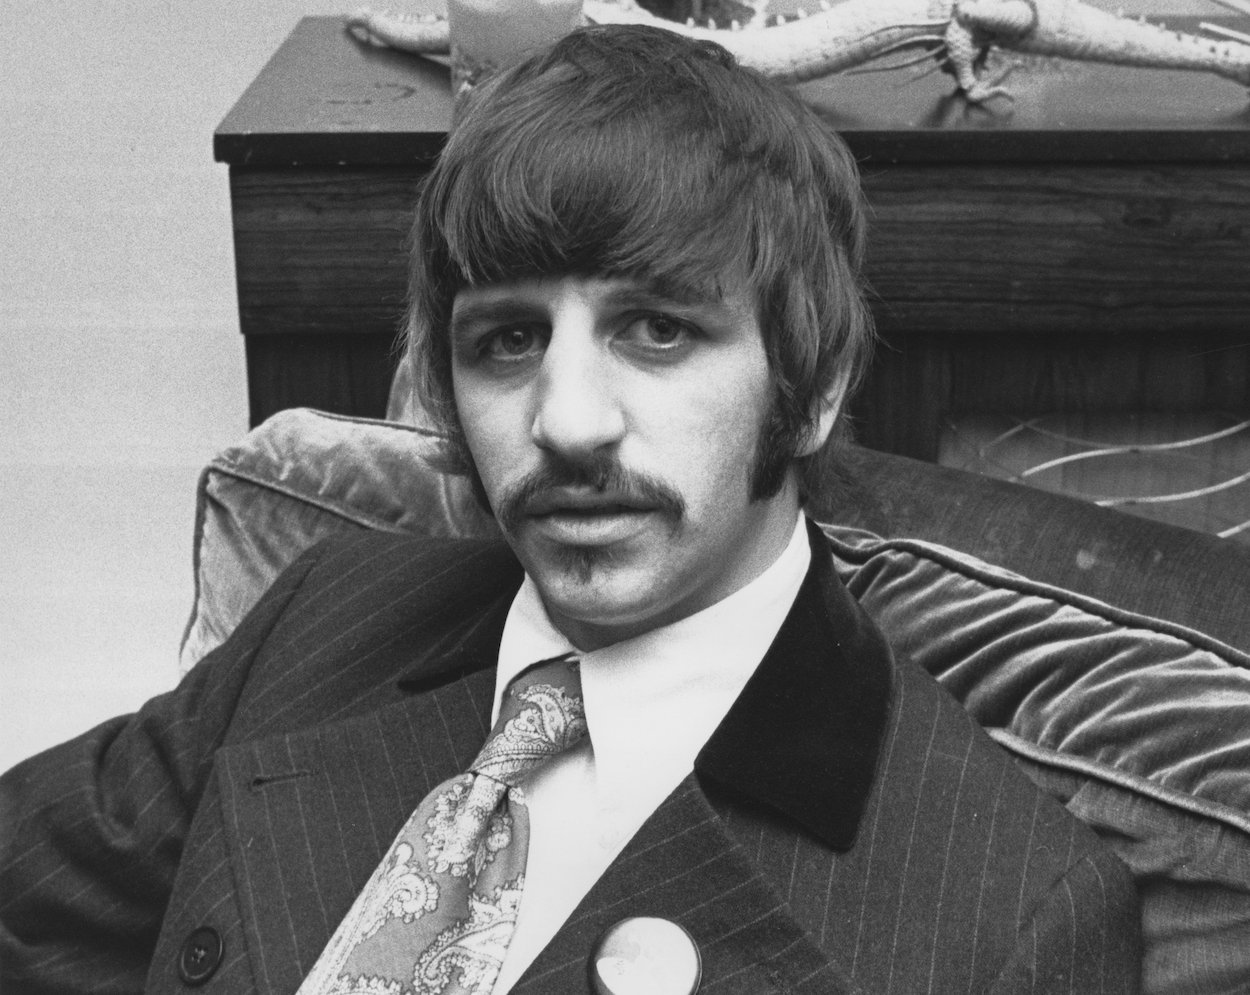 Ringo Starr, pictured at the home of Beatles manager Brian Epstein in 1967, once lied about his job of dating girls but was fired for drunkenly shouting at his boss.